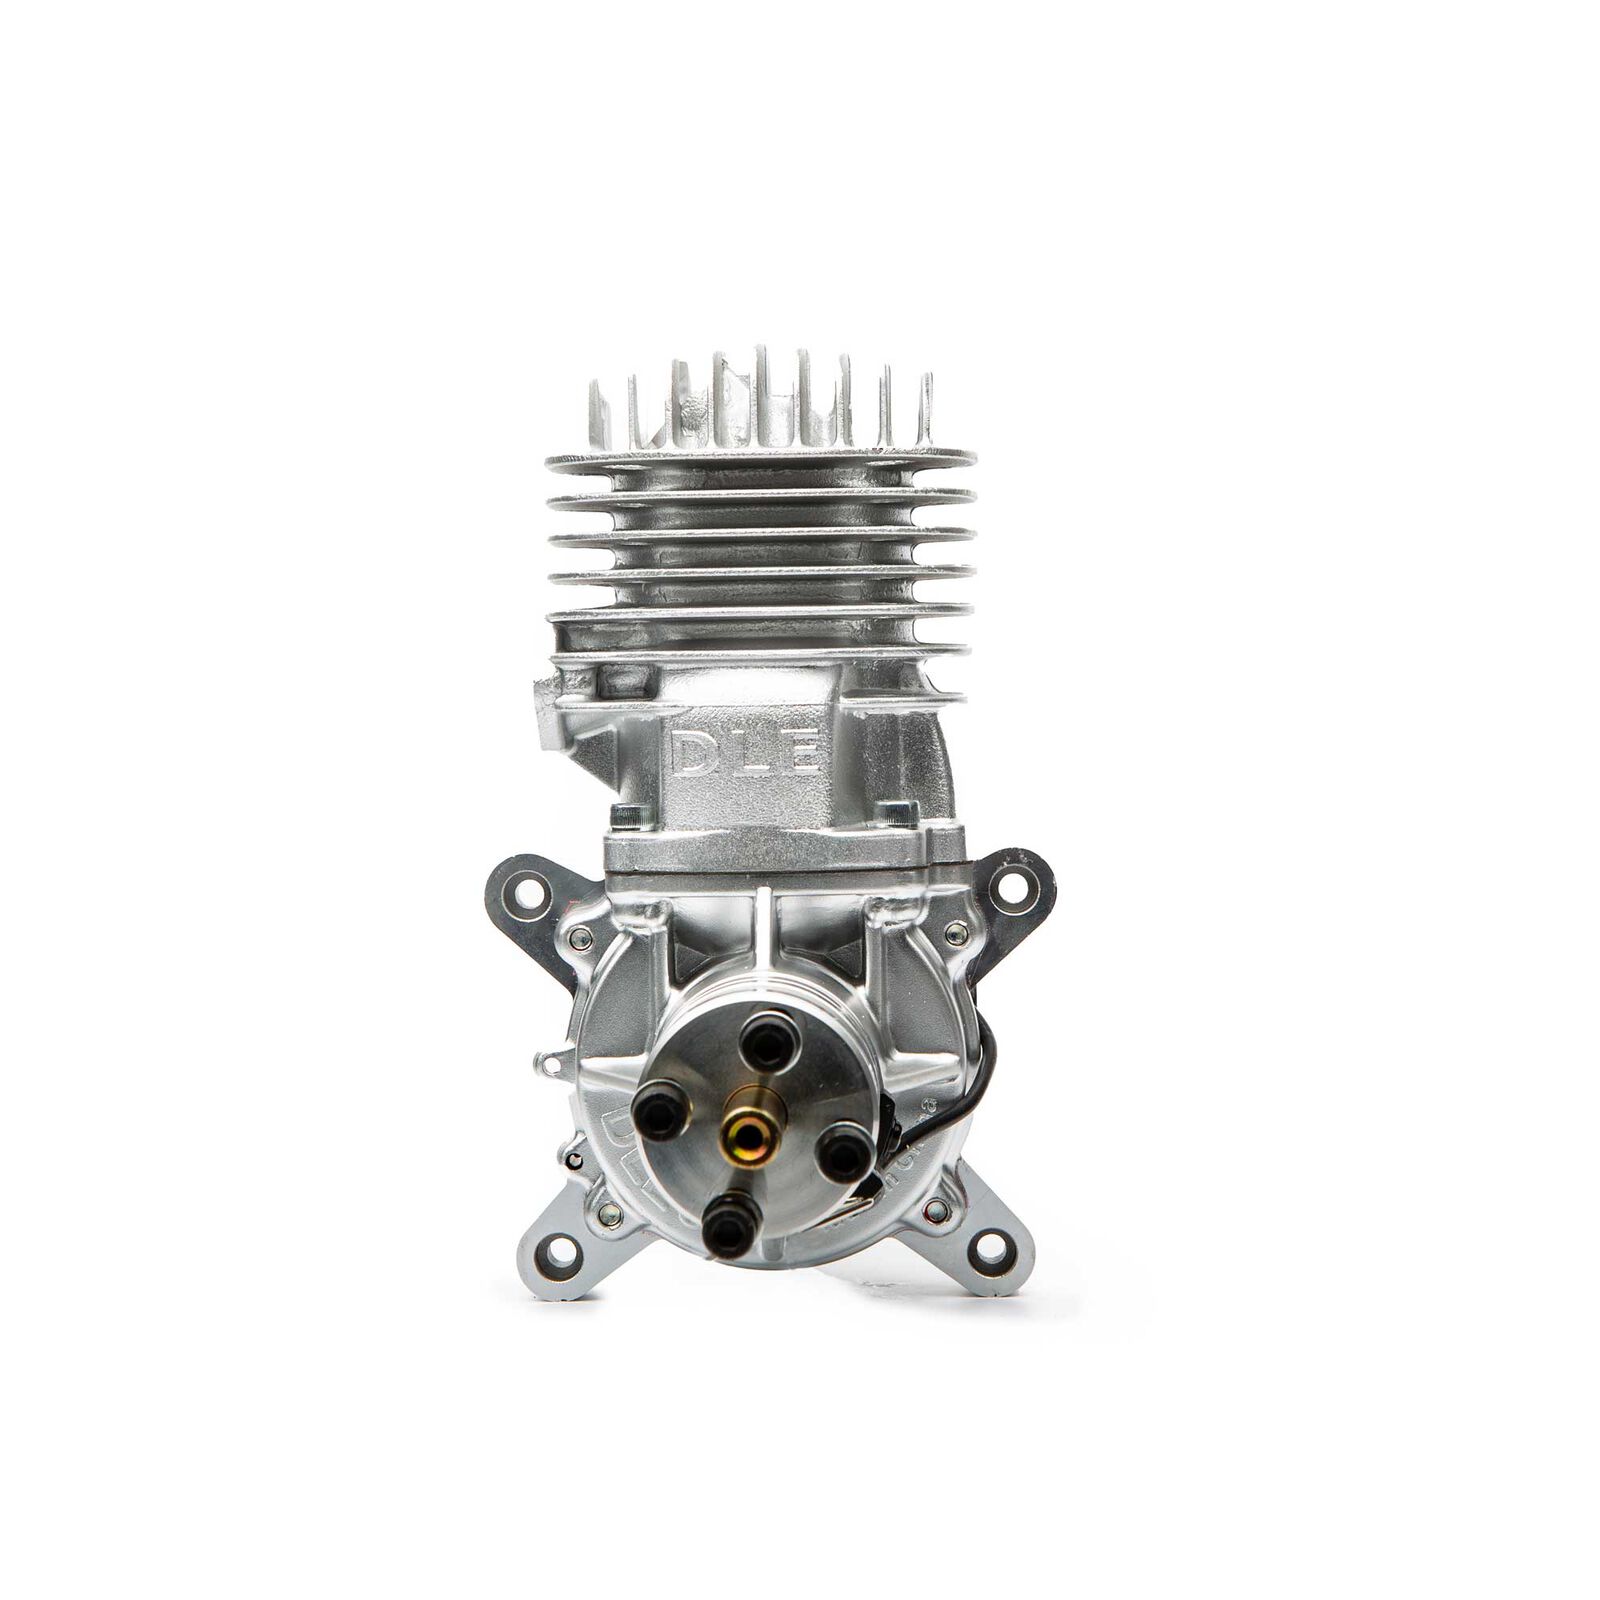 DLE Engines DLE-65cc Gas Engine with Elect Ignition and Muffler | Tower ...